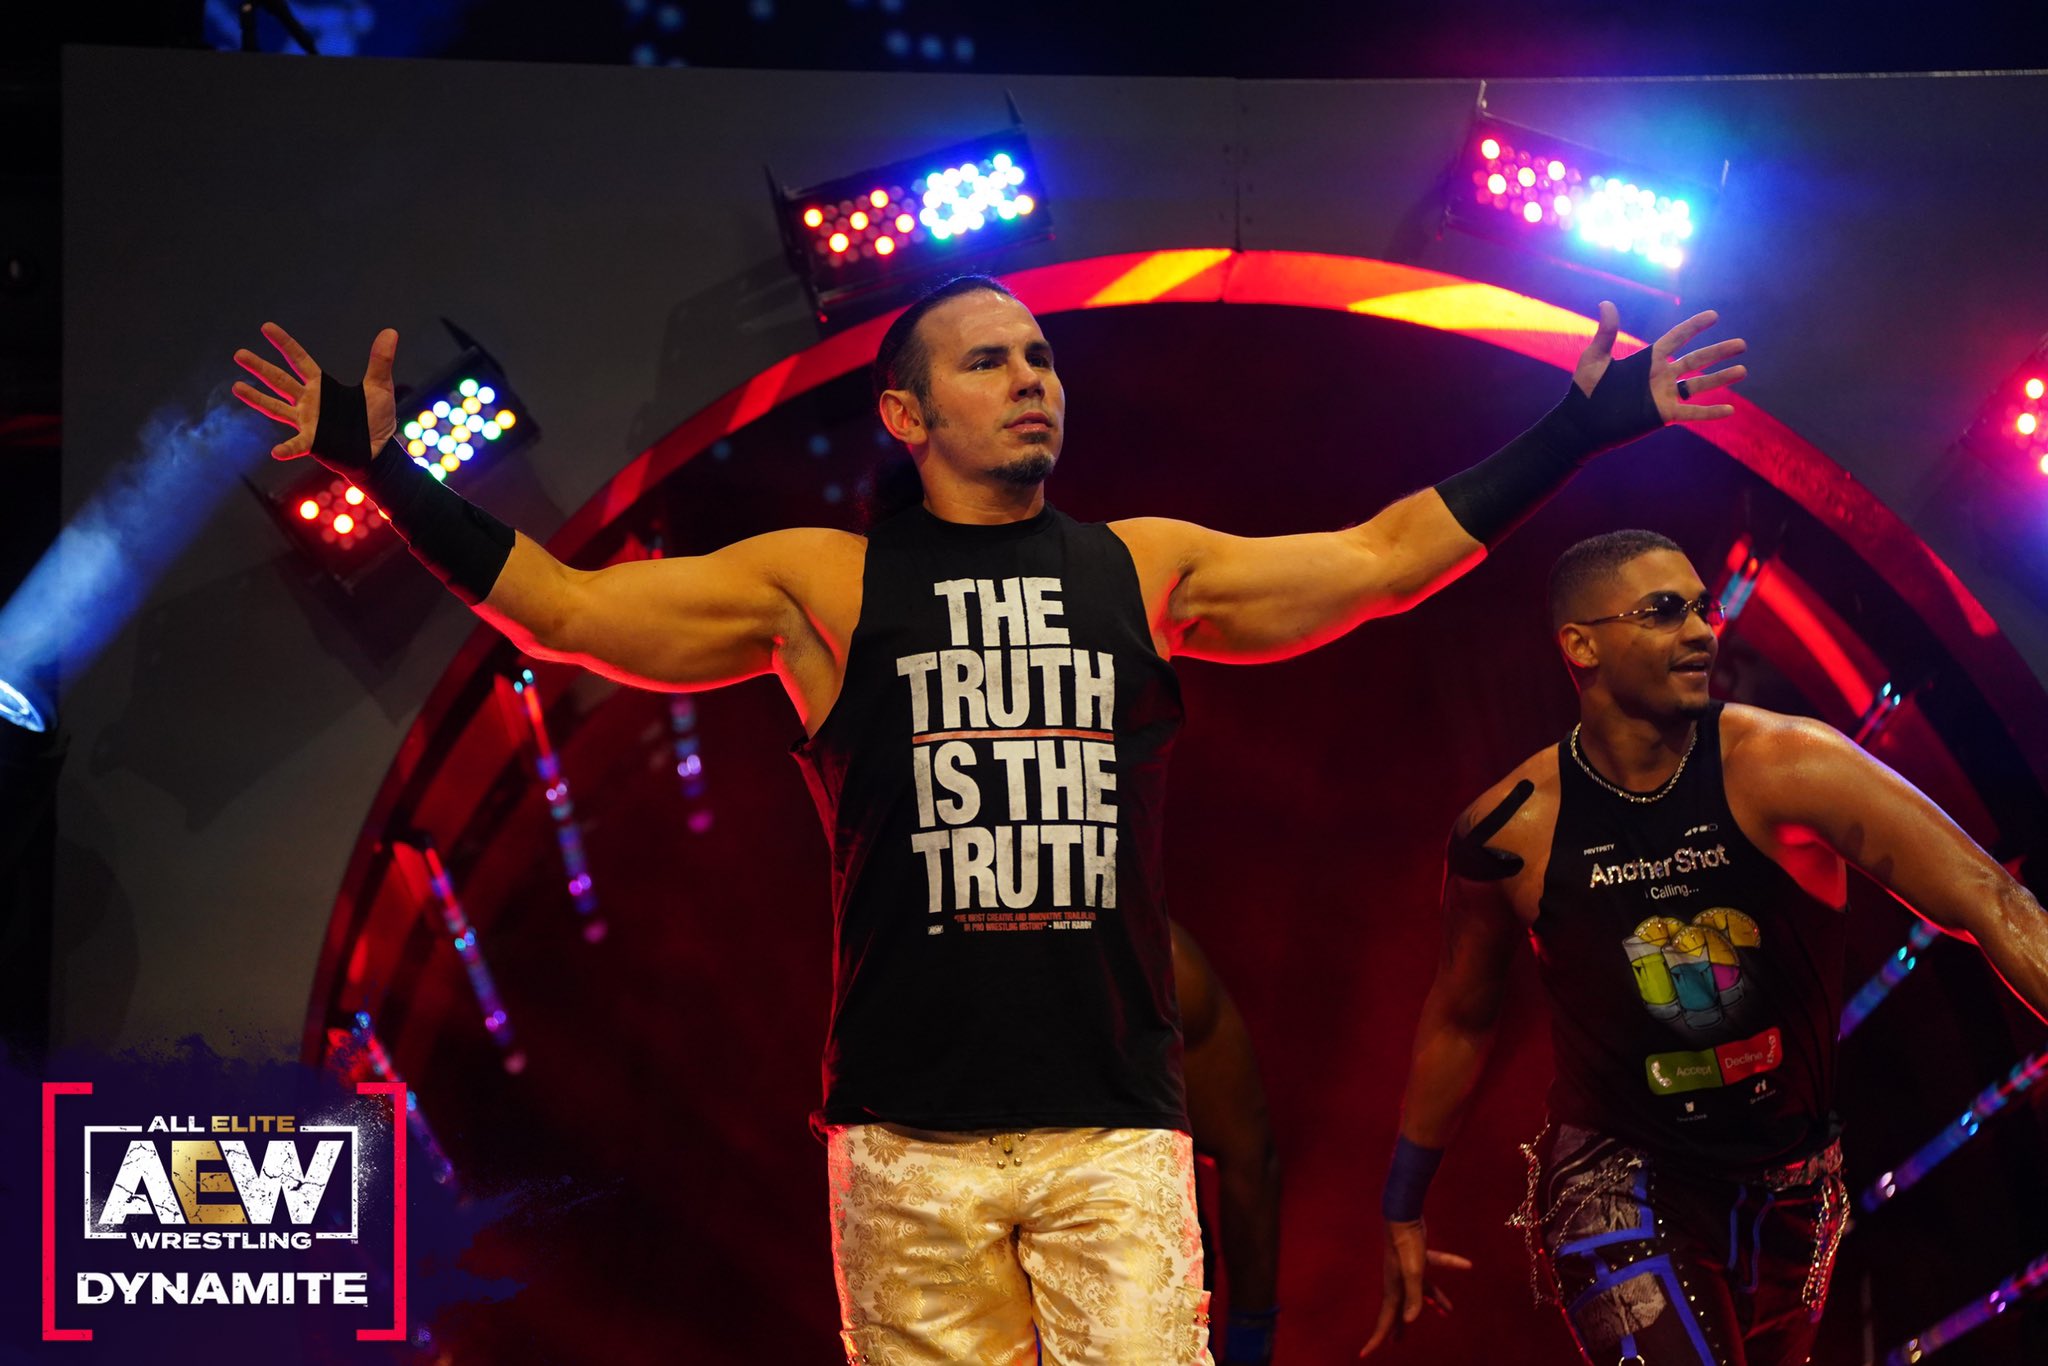 MATT HARDY on Twitter: &quot;THE TRUTH IS THE TRUTH https://t.co/qMm6akA6sw… &quot;